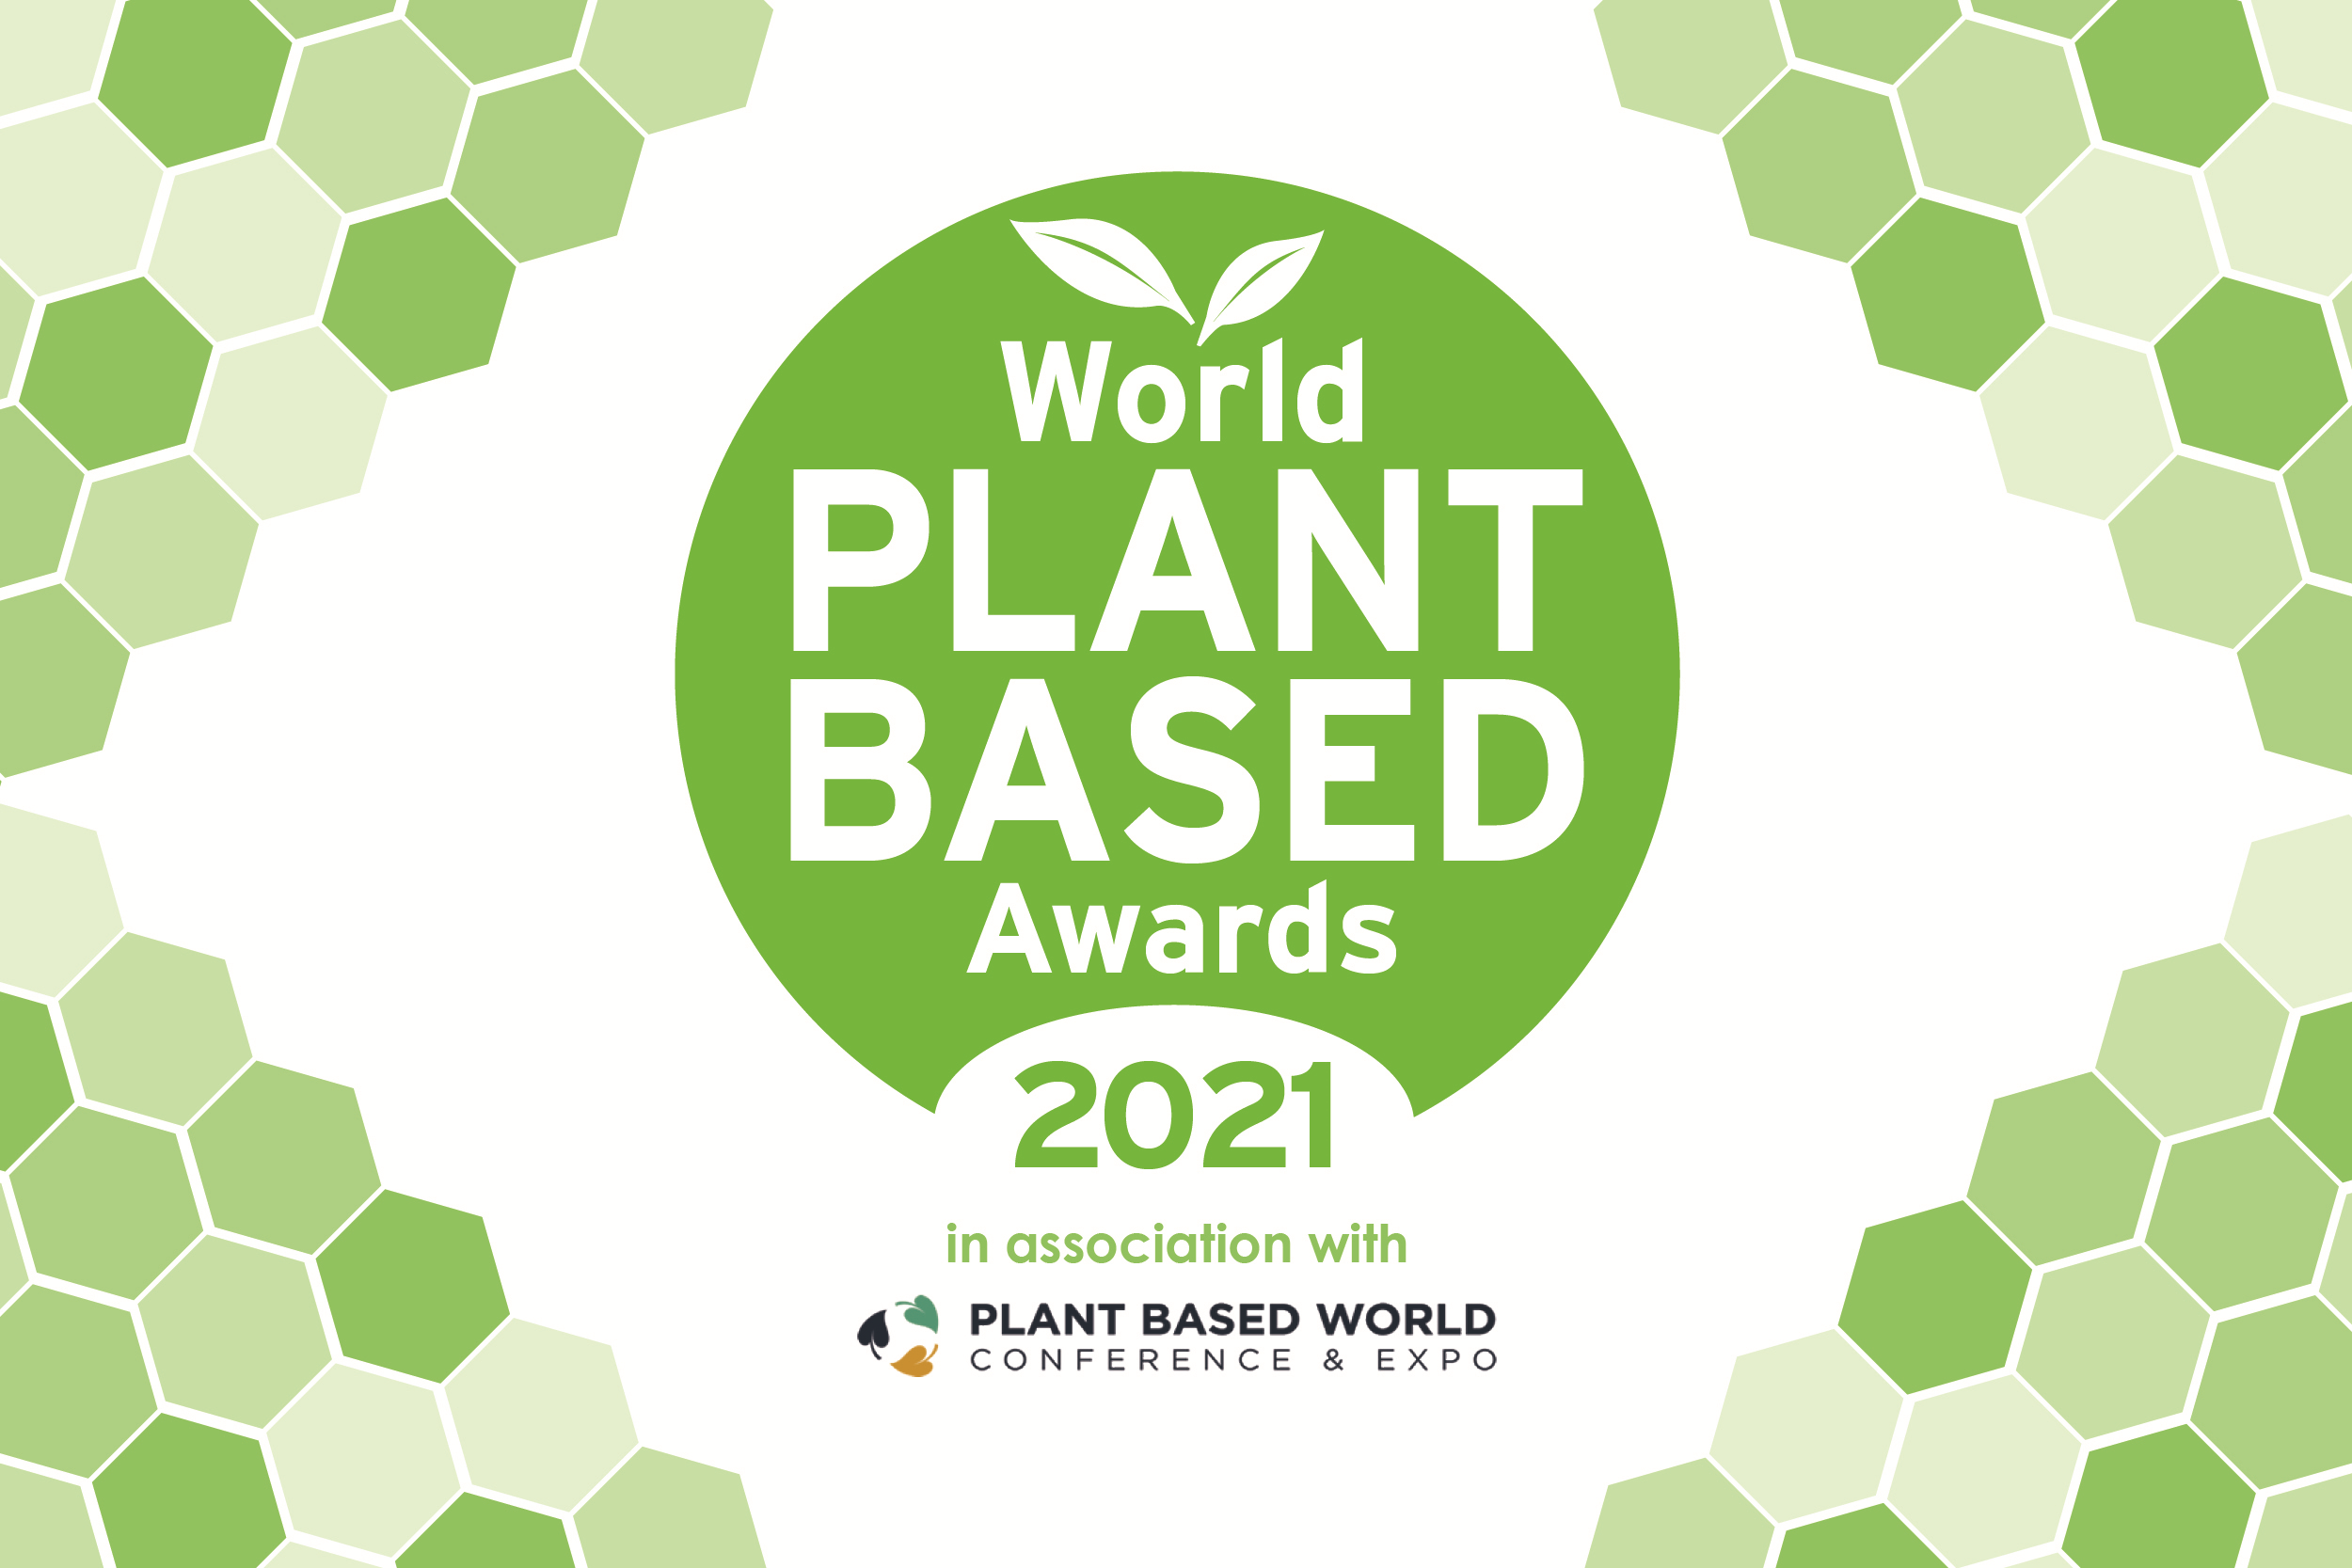 World Plant-Based Awards 2021 are now live